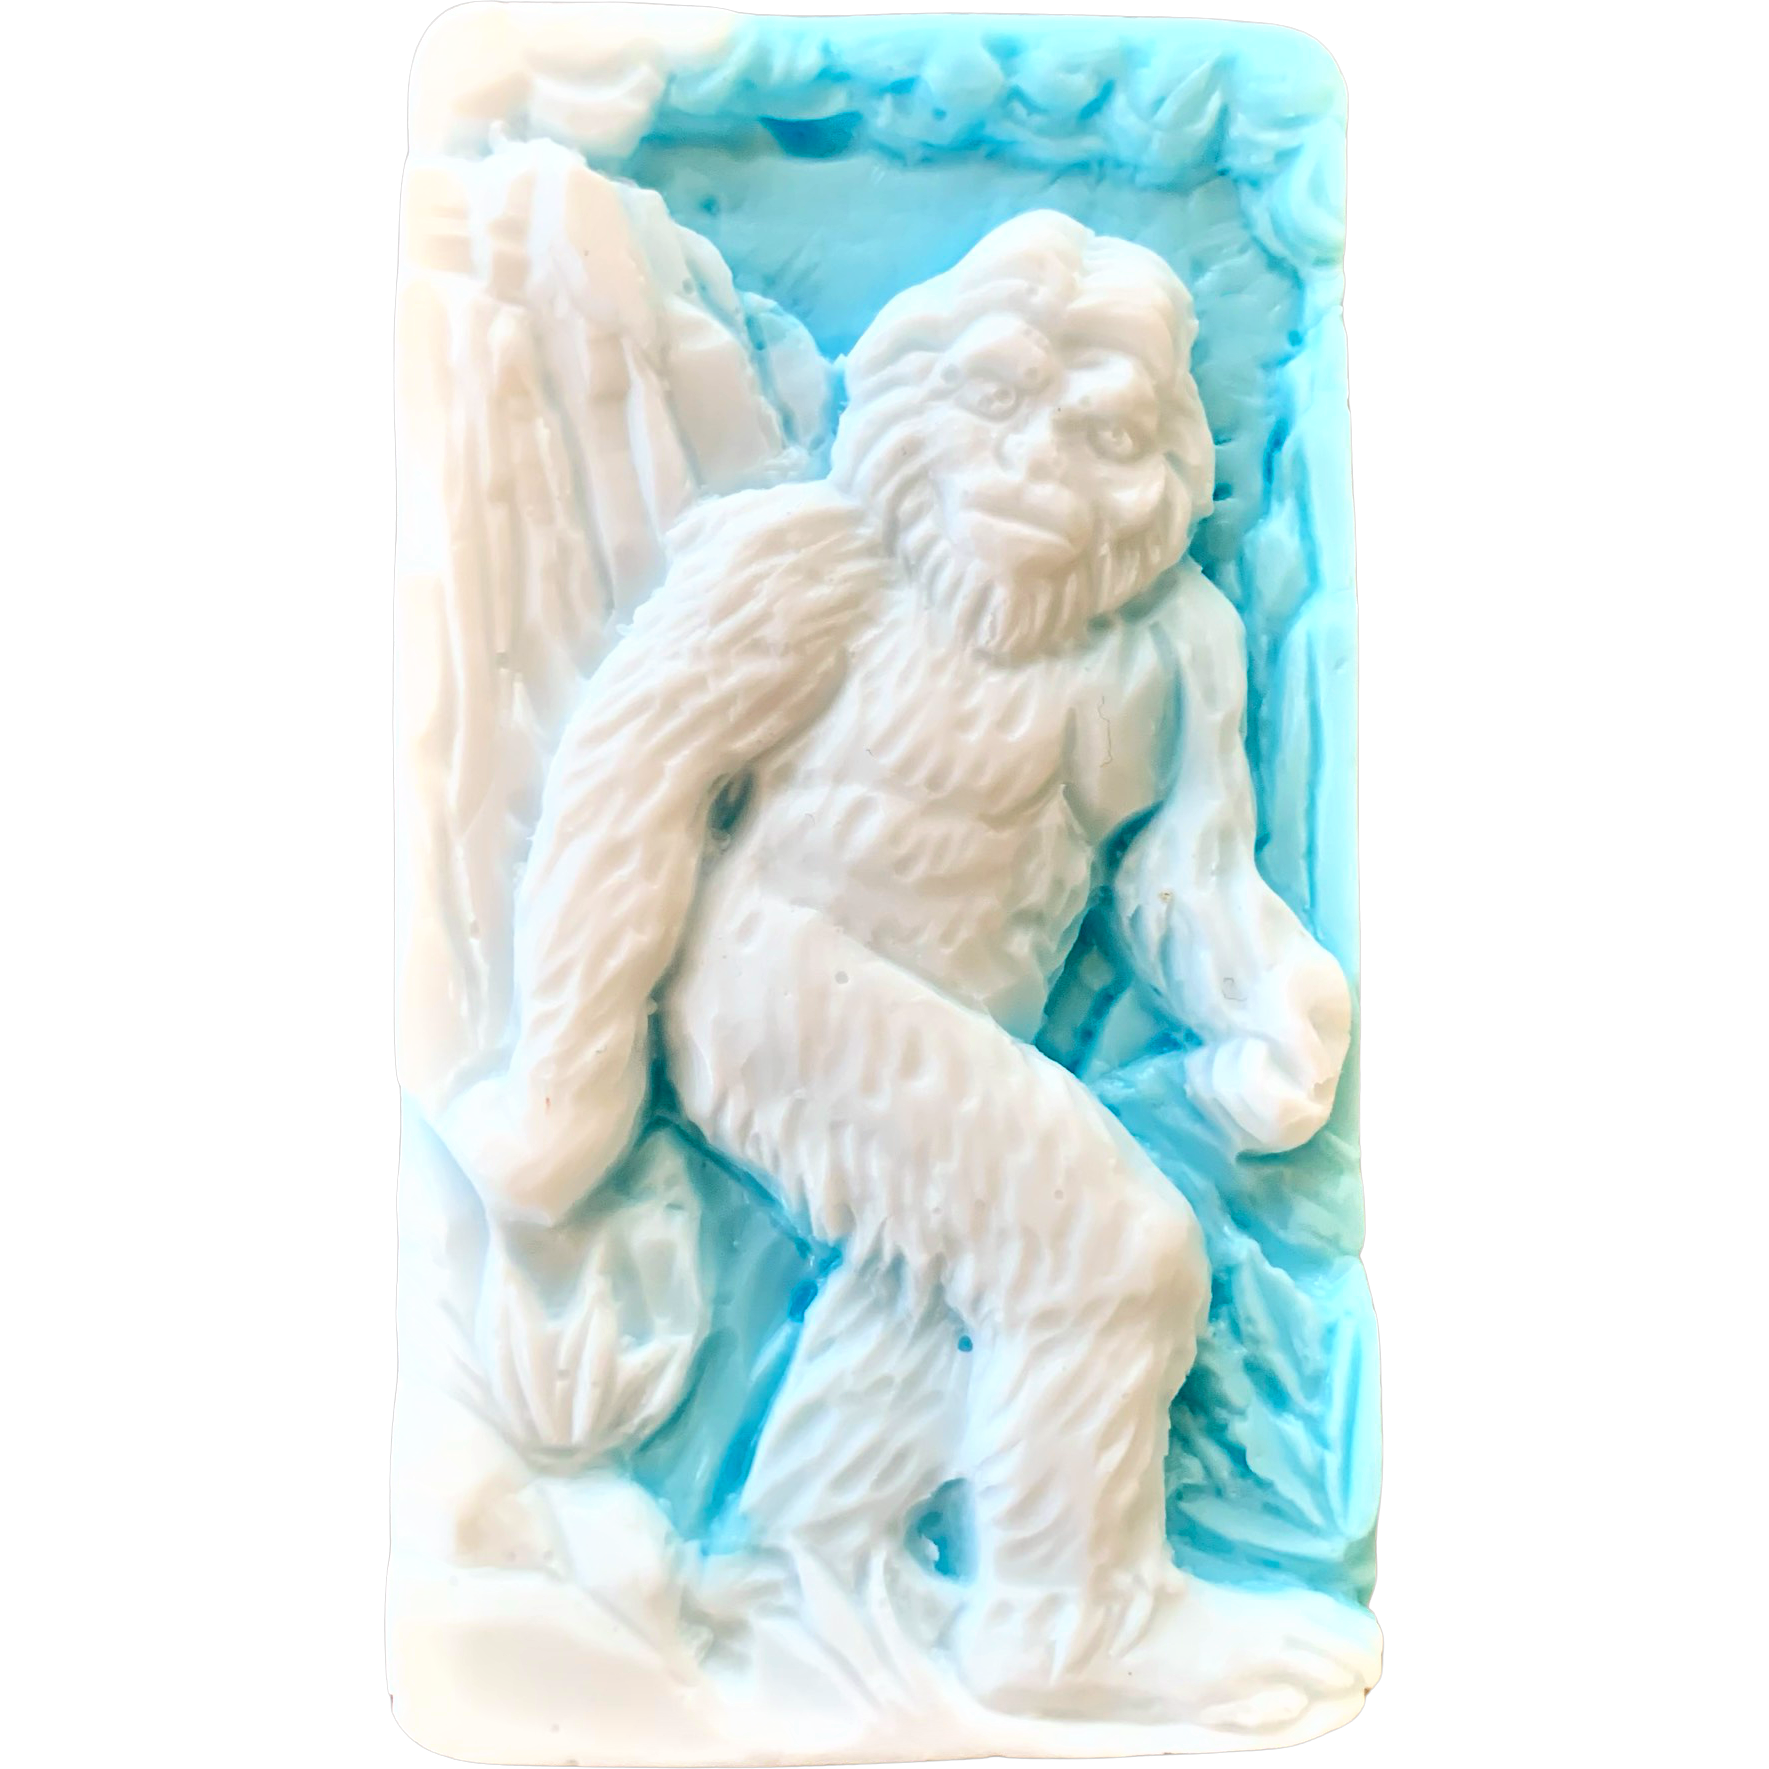 Yeti/Abominable Snowman Soap:  Free Shipping